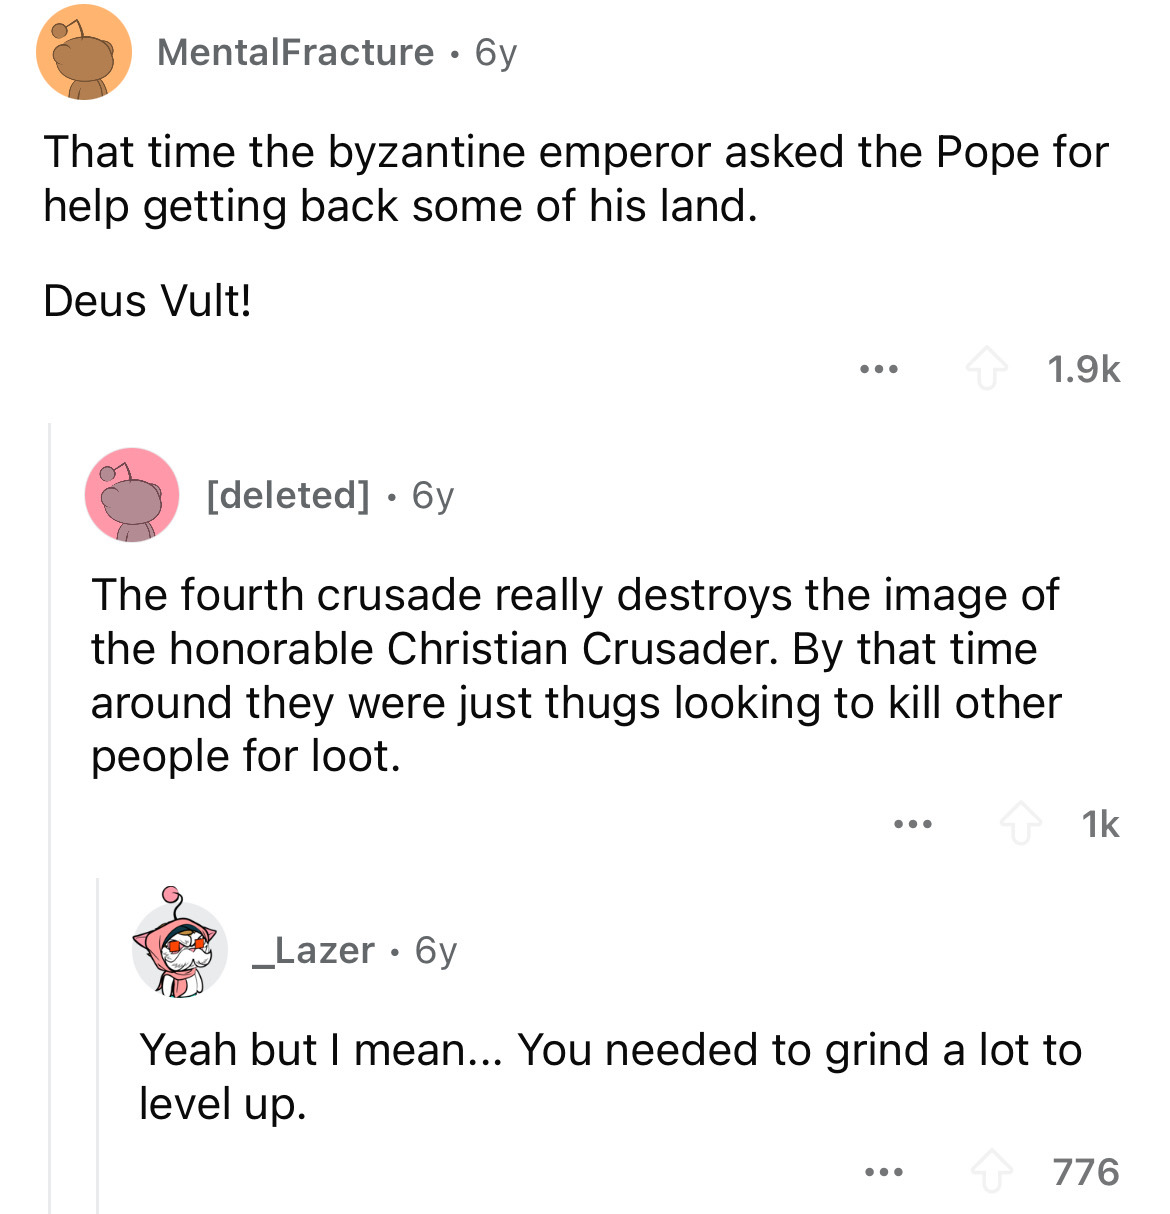 screenshot - MentalFracture 6y That time the byzantine emperor asked the Pope for help getting back some of his land. Deus Vult! deleted 6y The fourth crusade really destroys the image of the honorable Christian Crusader. By that time around they were jus